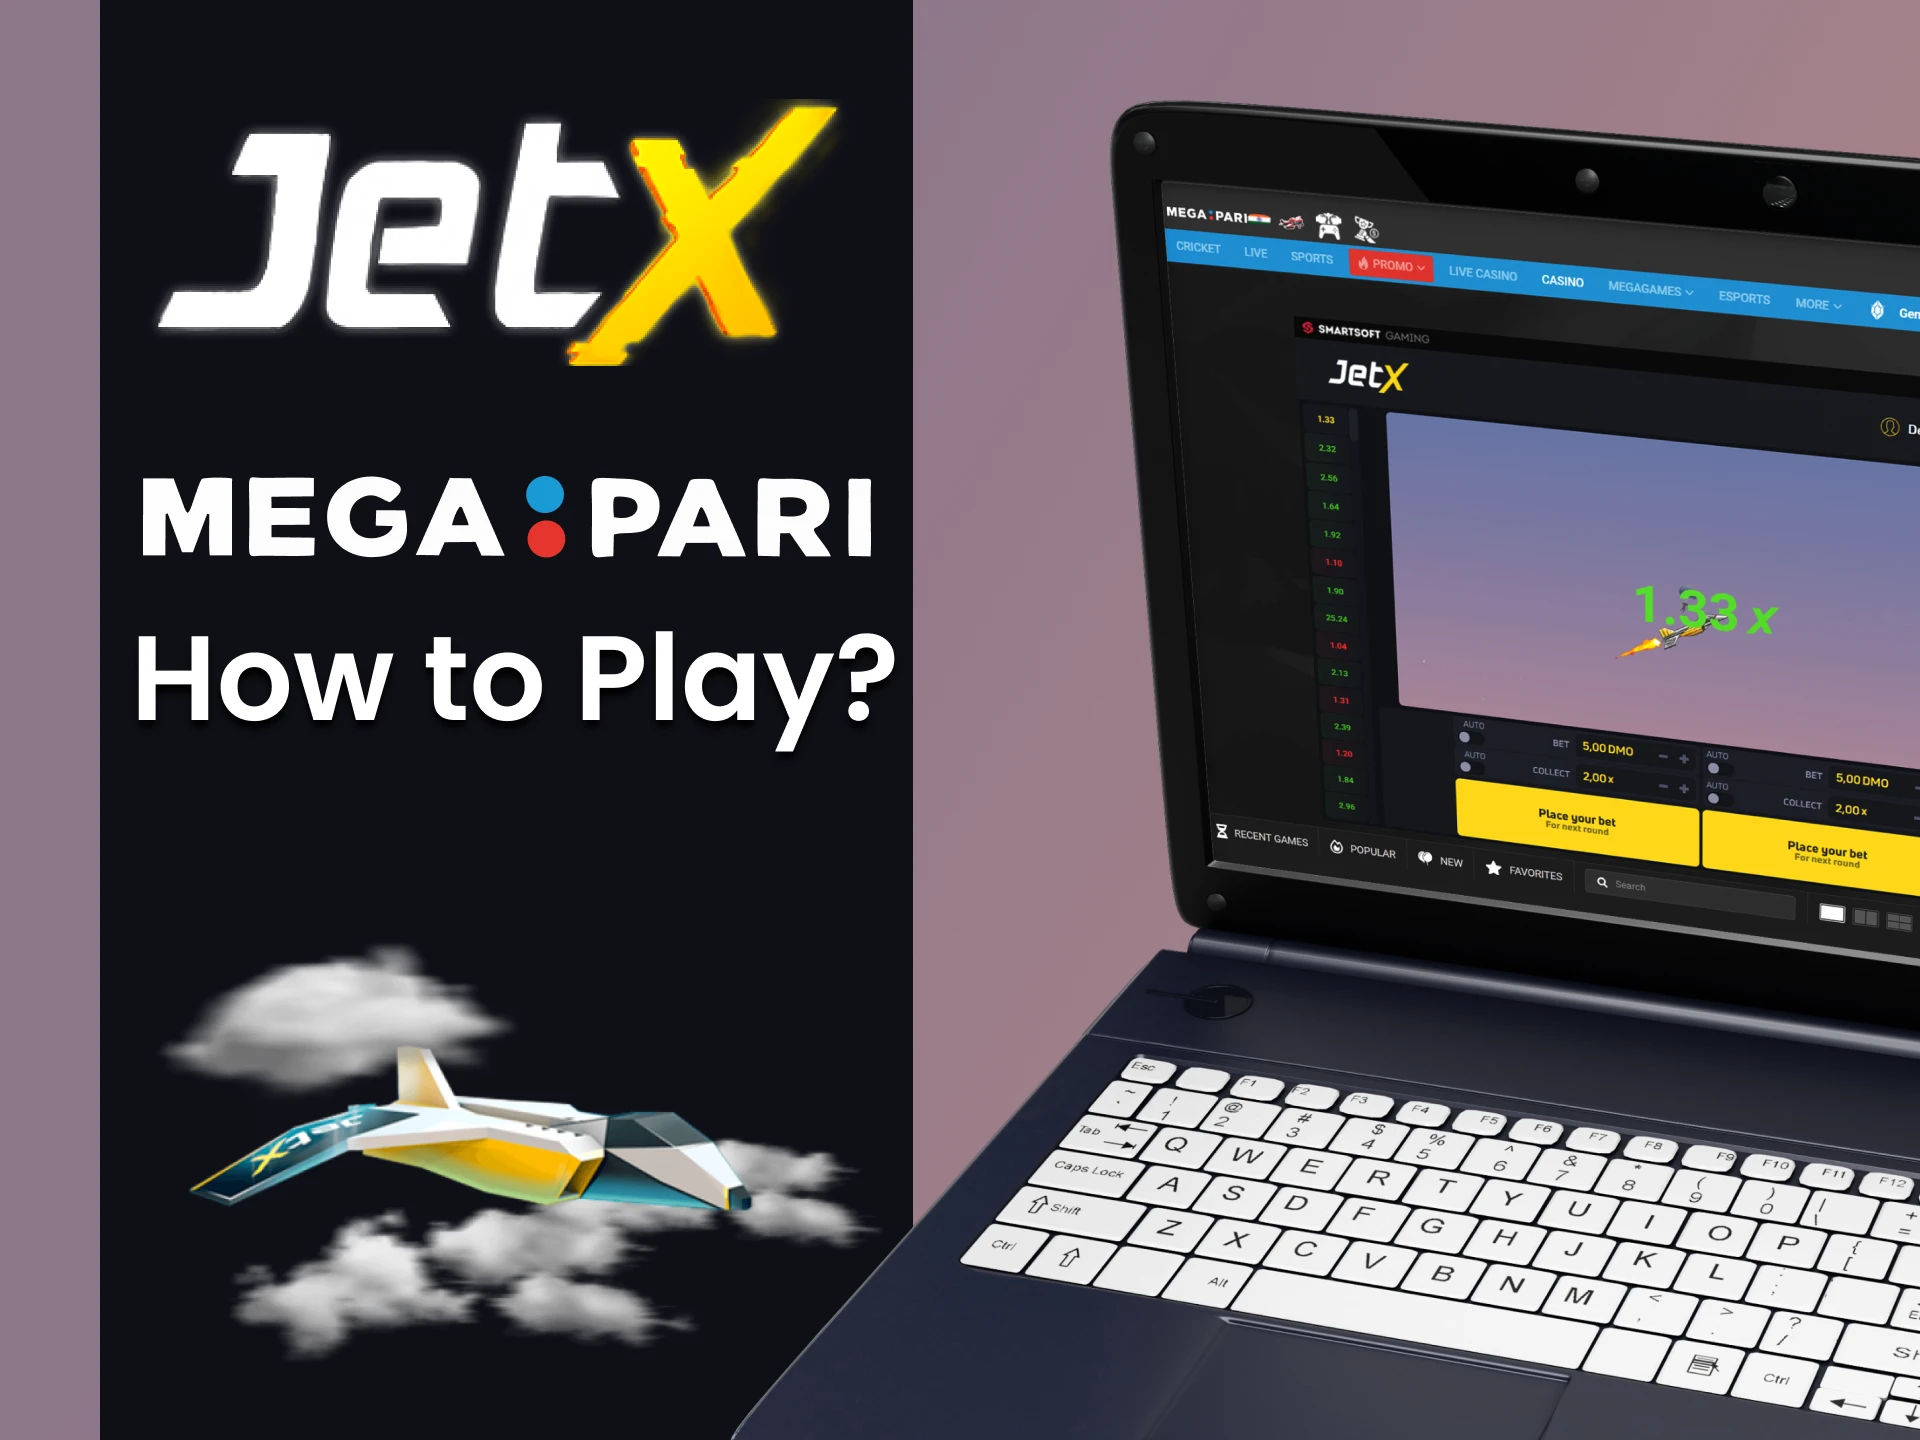 We will show you how to play JetX on Megapari.